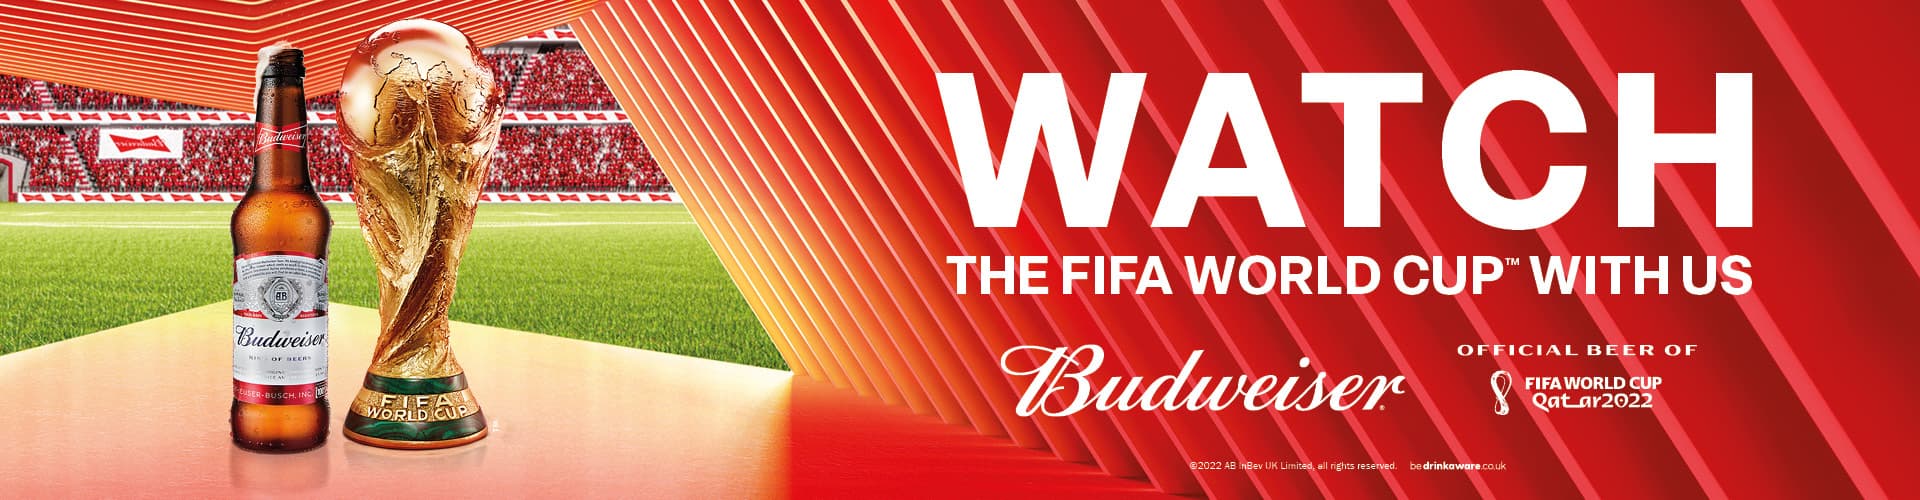 Watch the FIFA World Cup with us